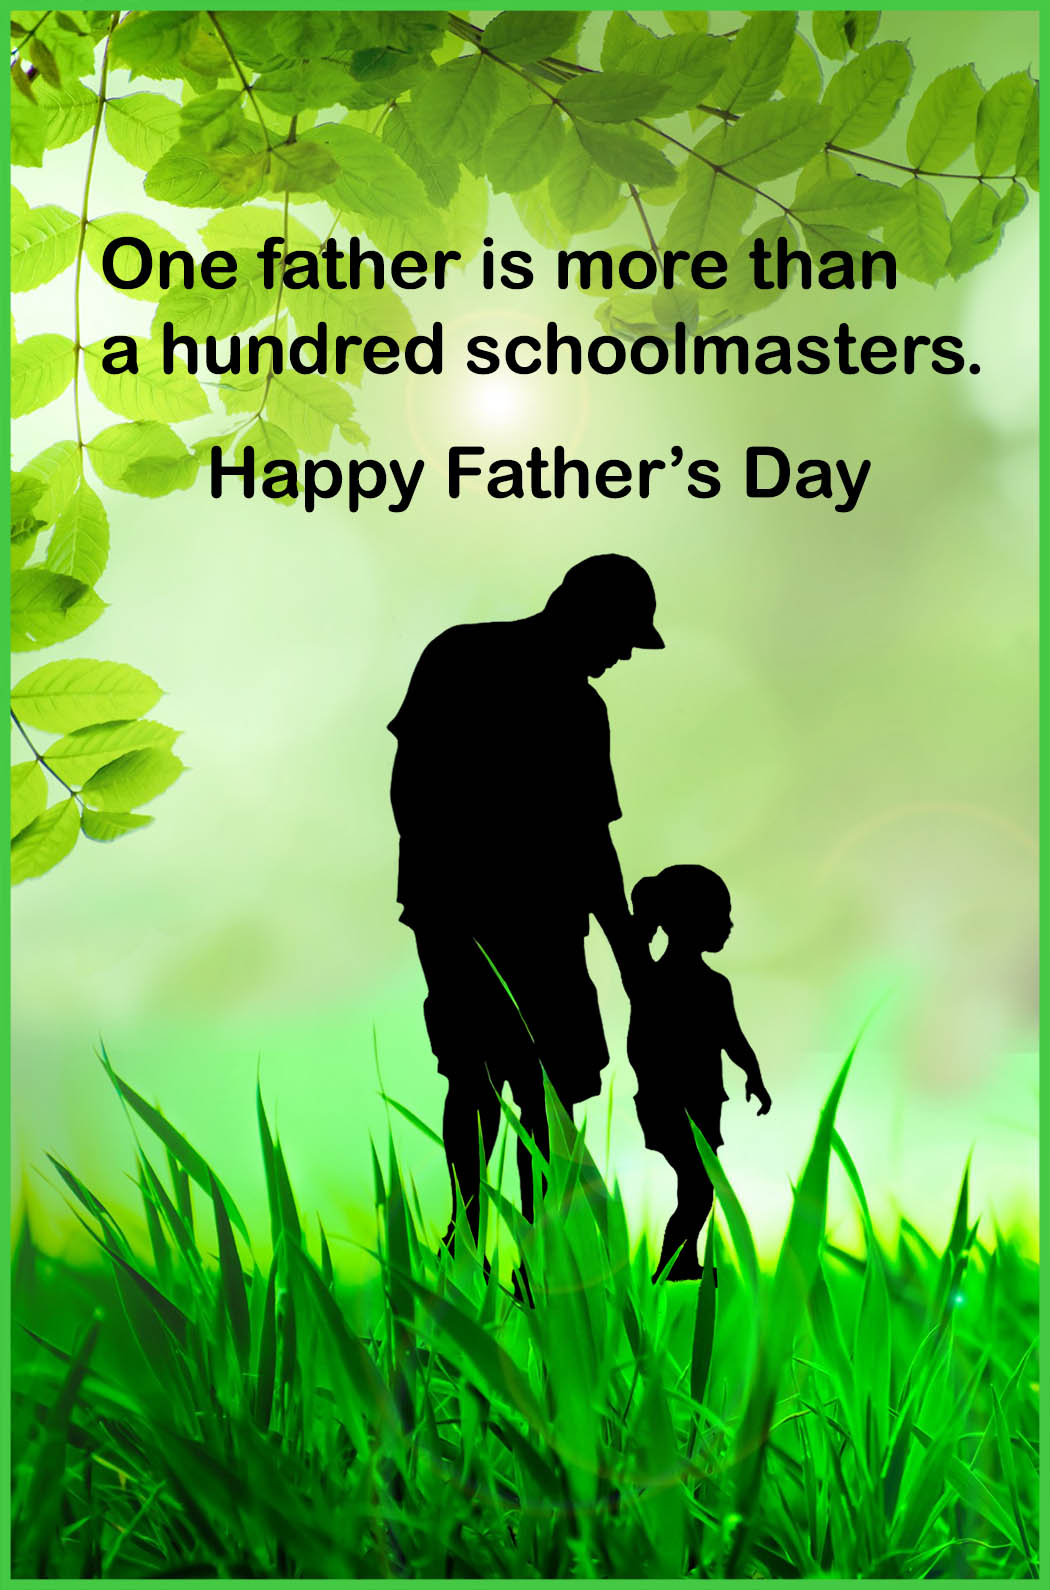 one father is more than a hundred schoolmasters. happy father’s day